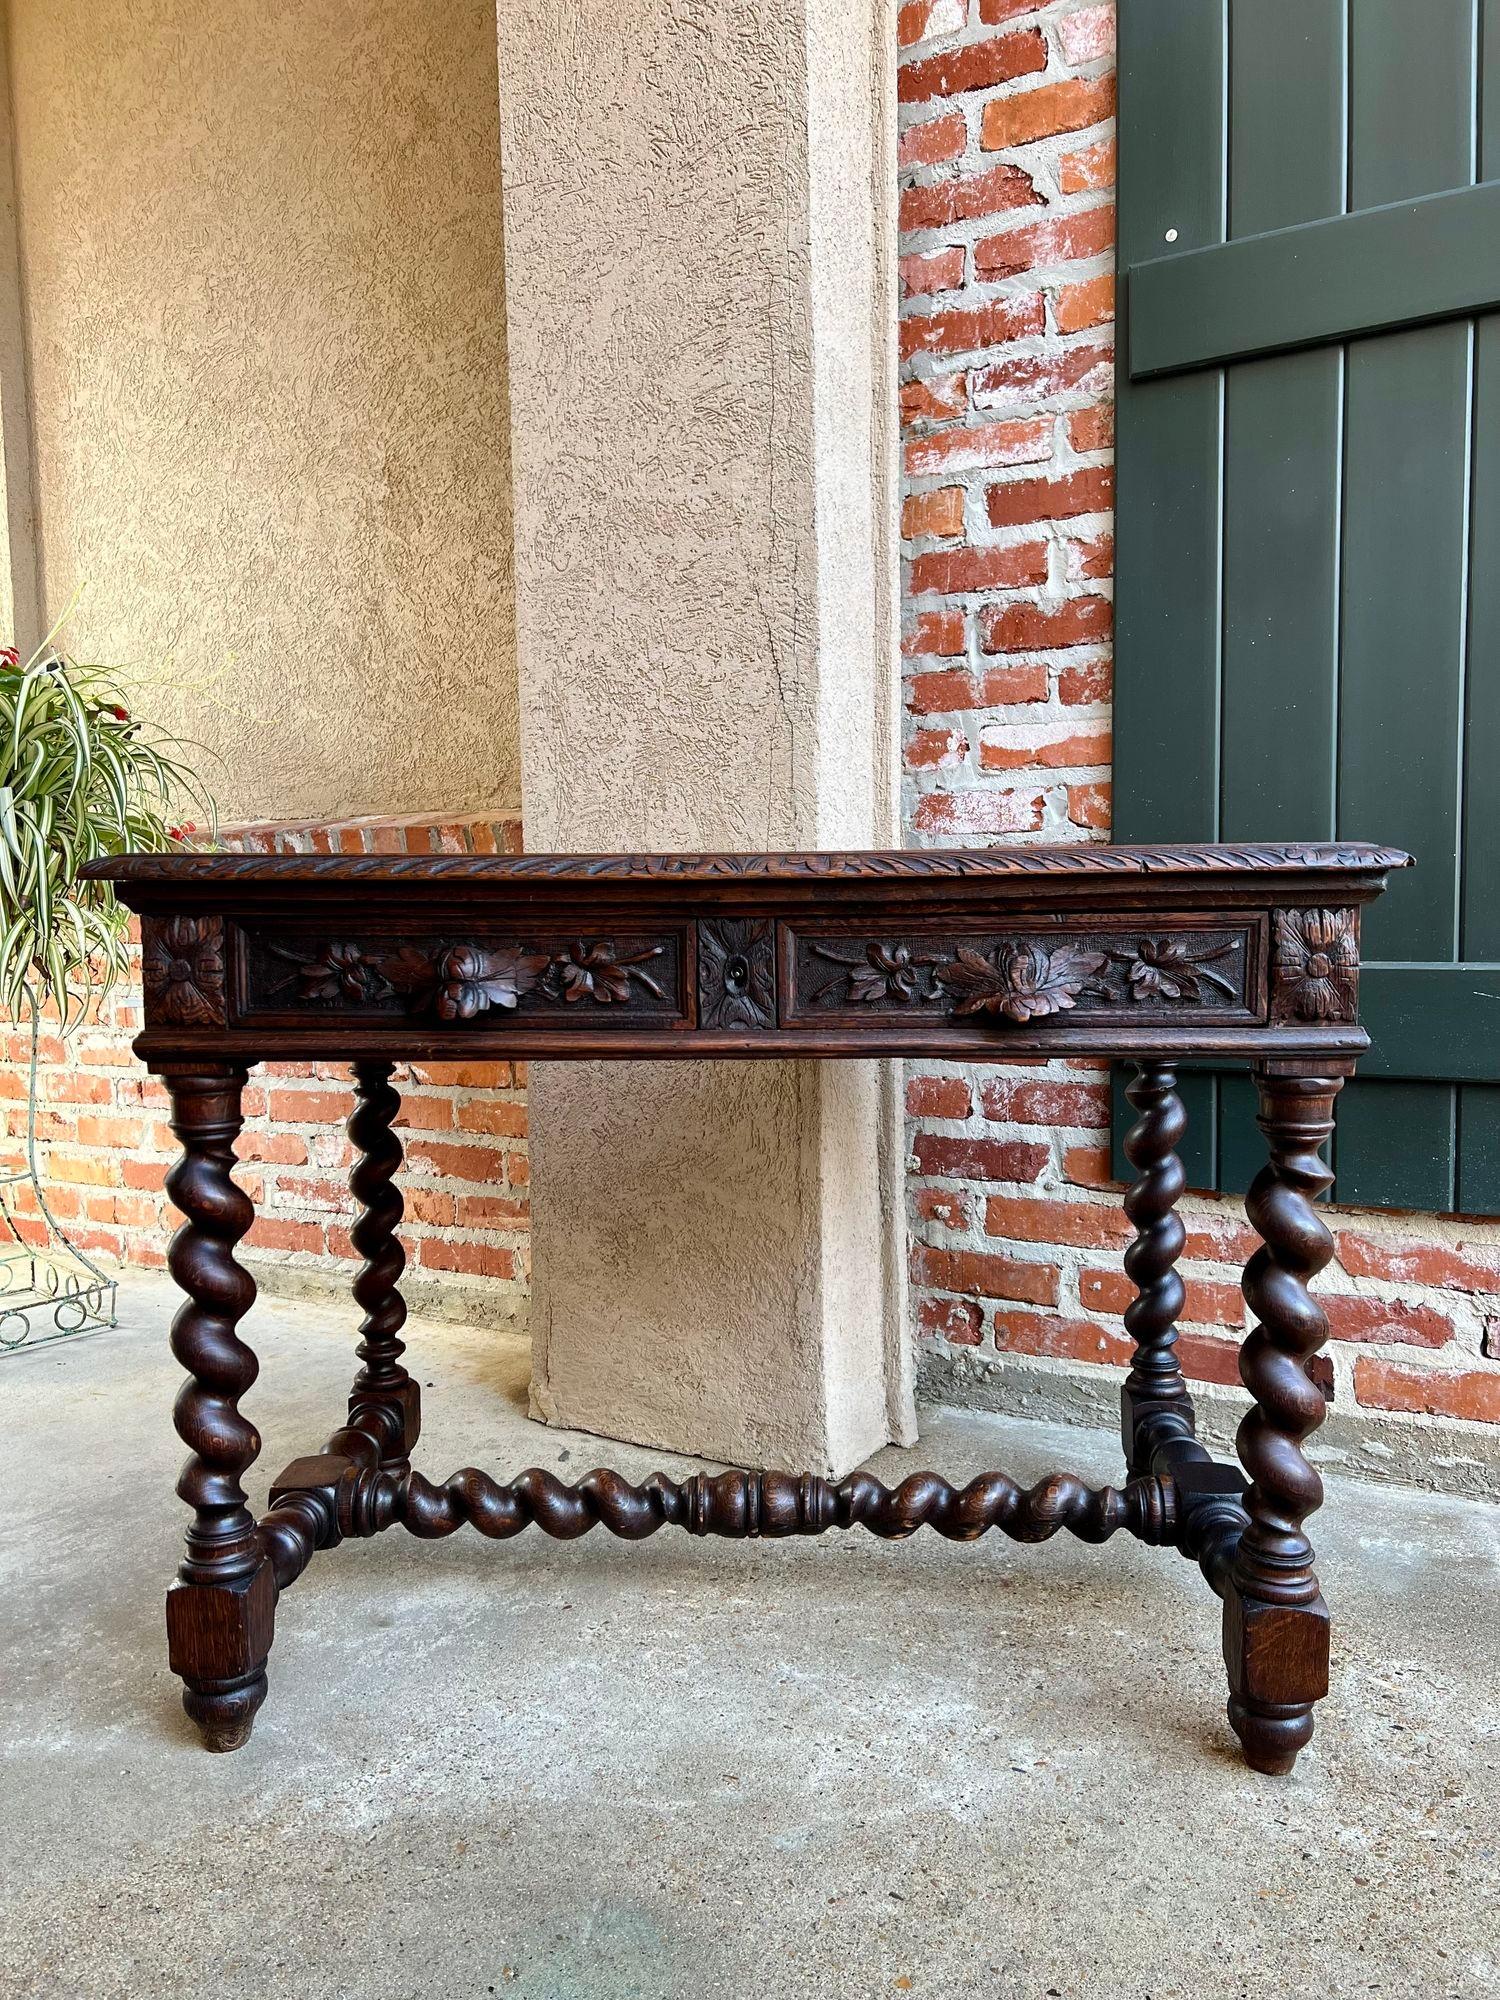 19th century French Oak Sofa Table Writing Desk Carved Black Forest Barley Twist.

 Direct from France, a lovely antique French writing desk or sofa table in a very versatile size with elegant features!!
Large, lovely barley twist legs as well as